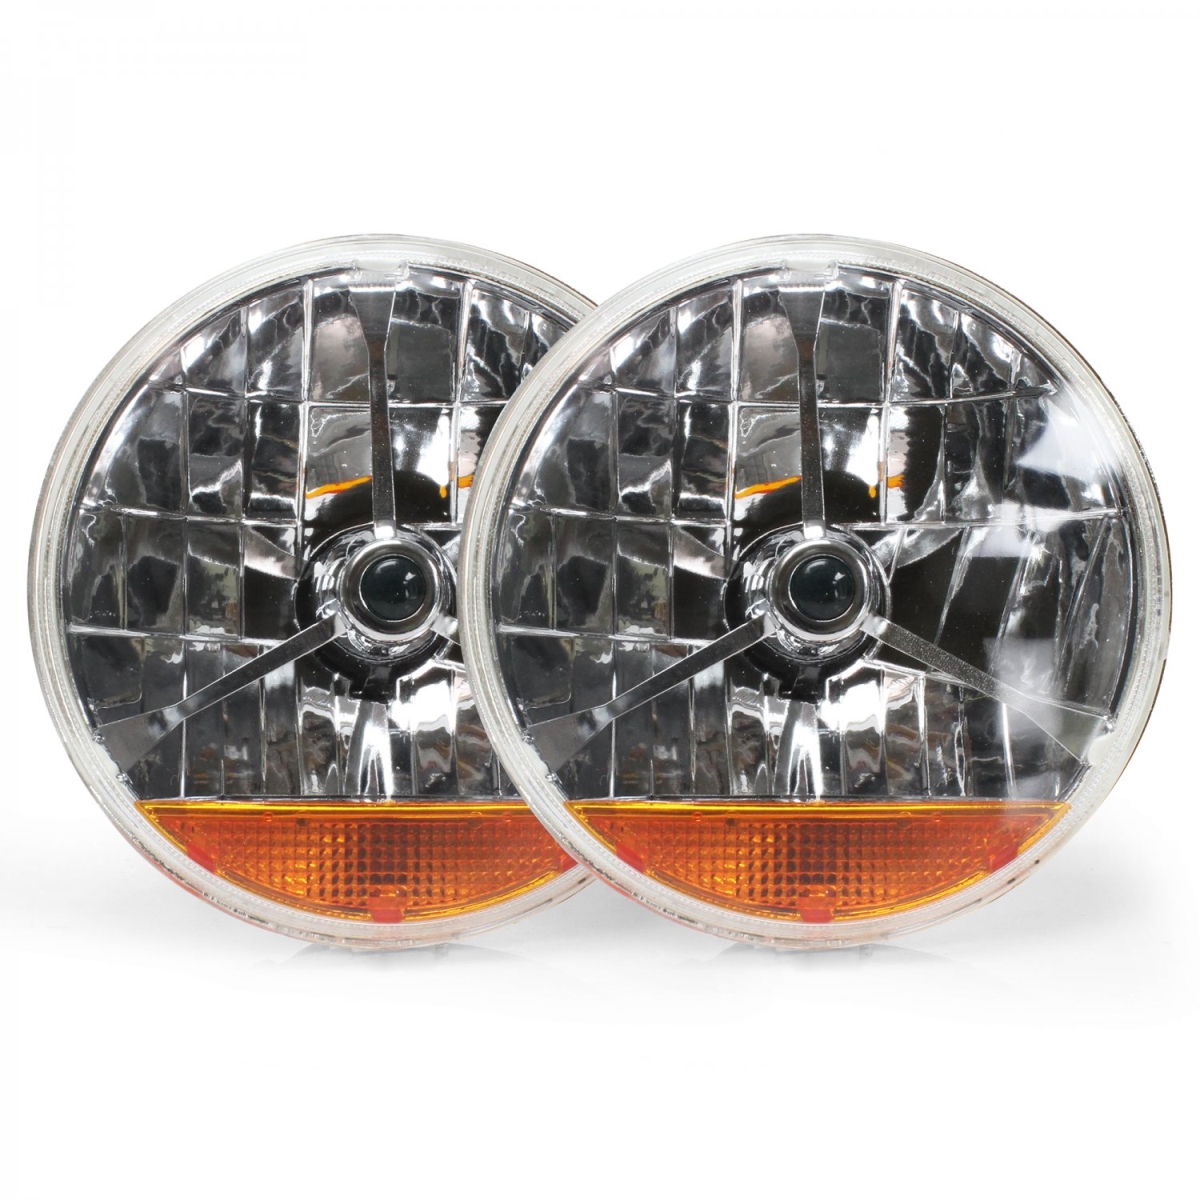 324101 7 In. Tri-bar Halogen Lens Assembly With Amber Turn Signal - Pack Of 2